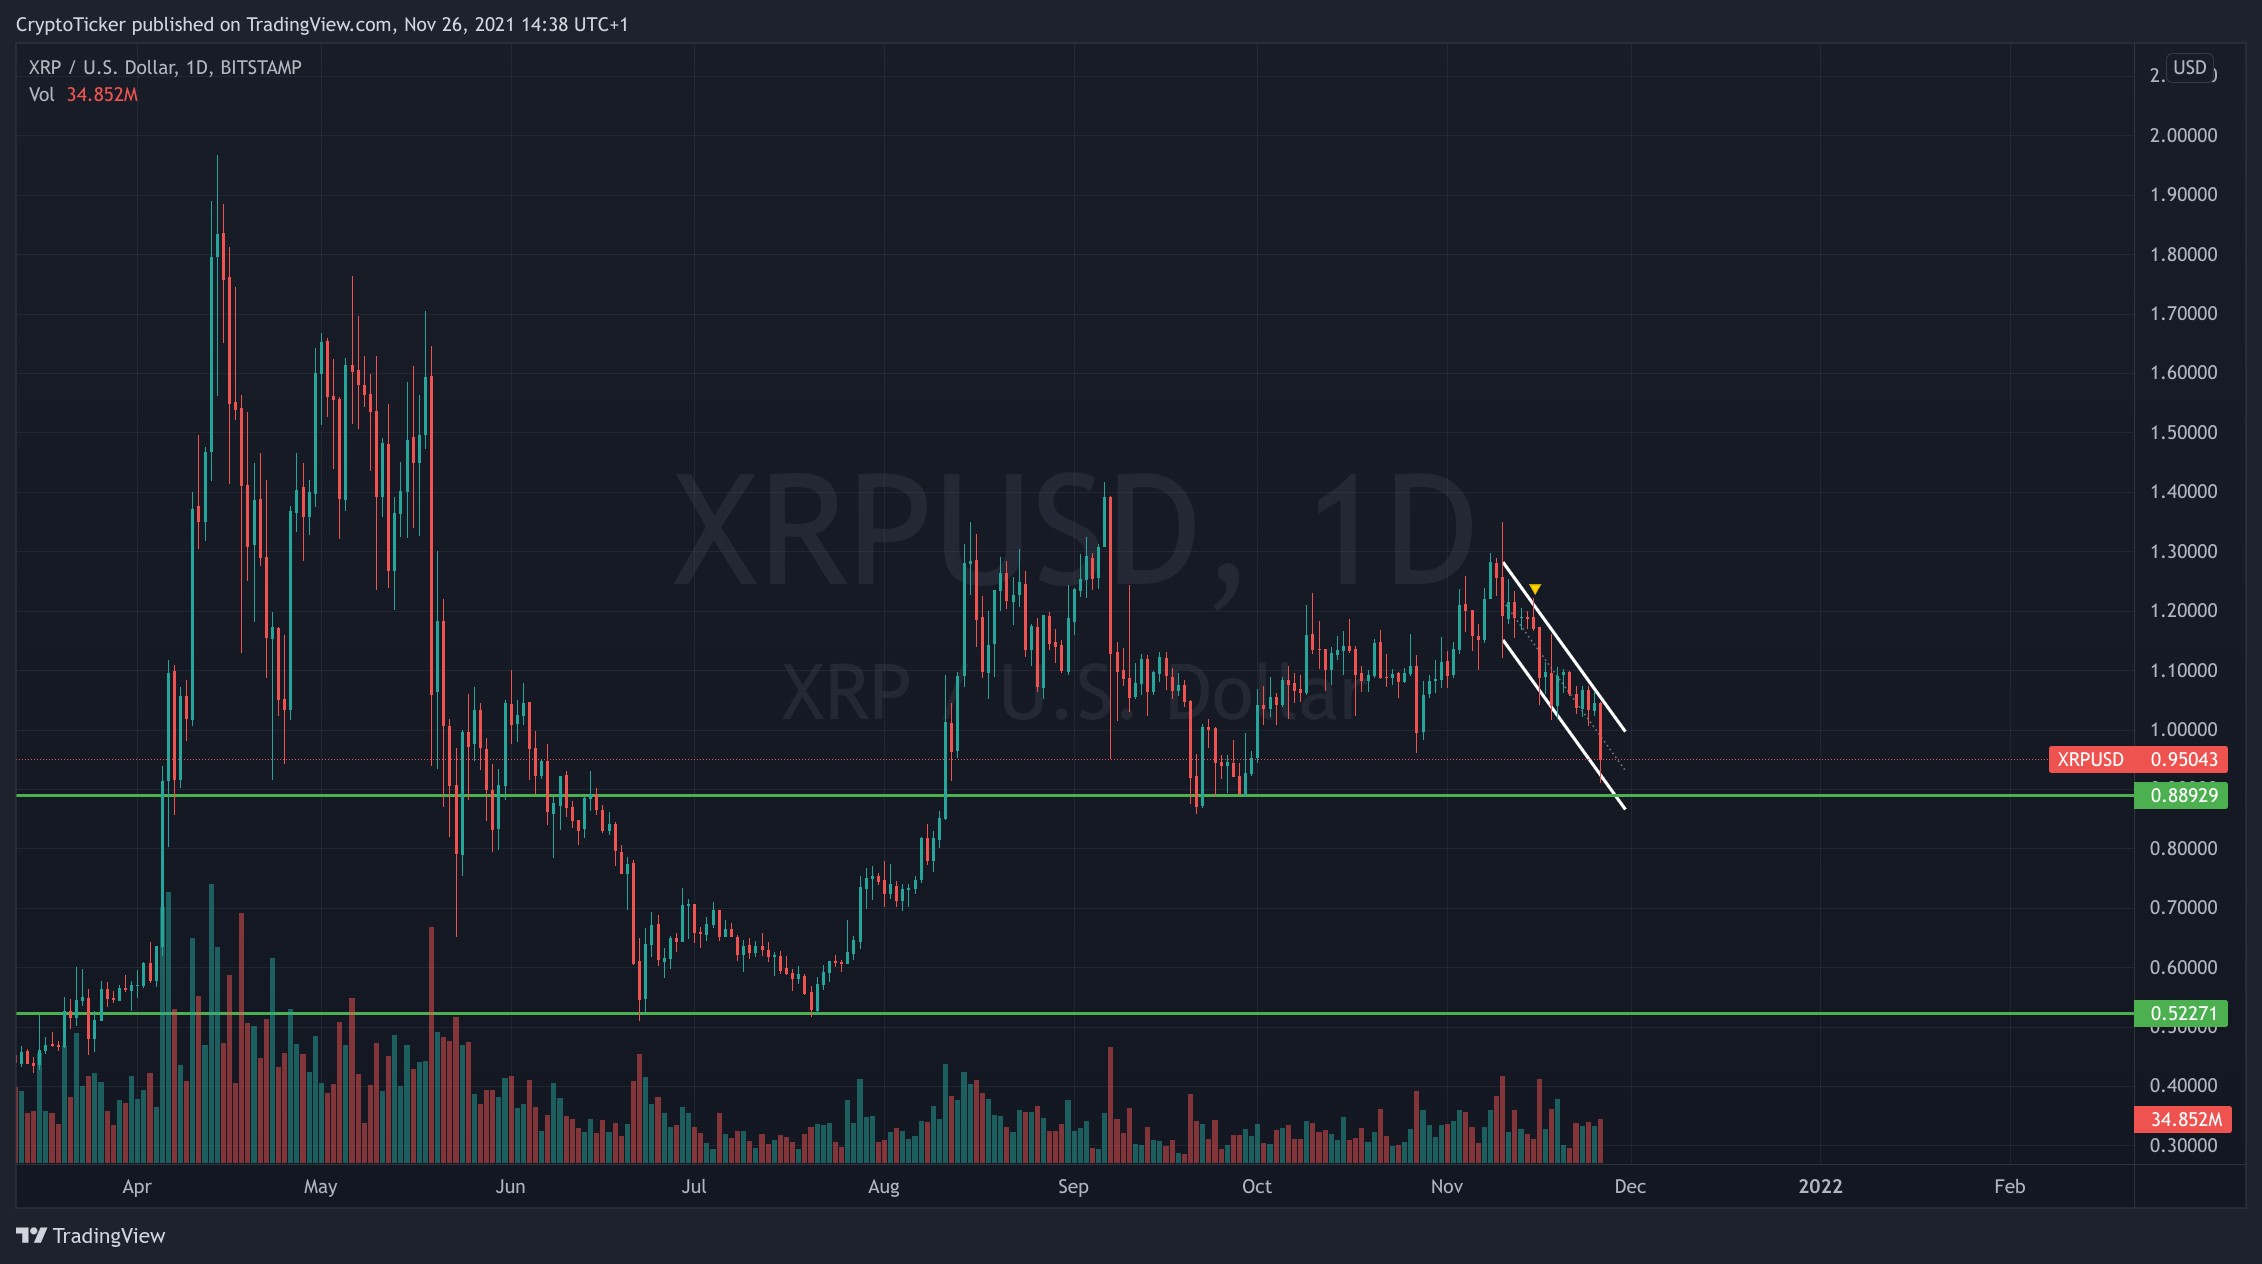 XRP/USD 1-day chart showing the support levels of XRP